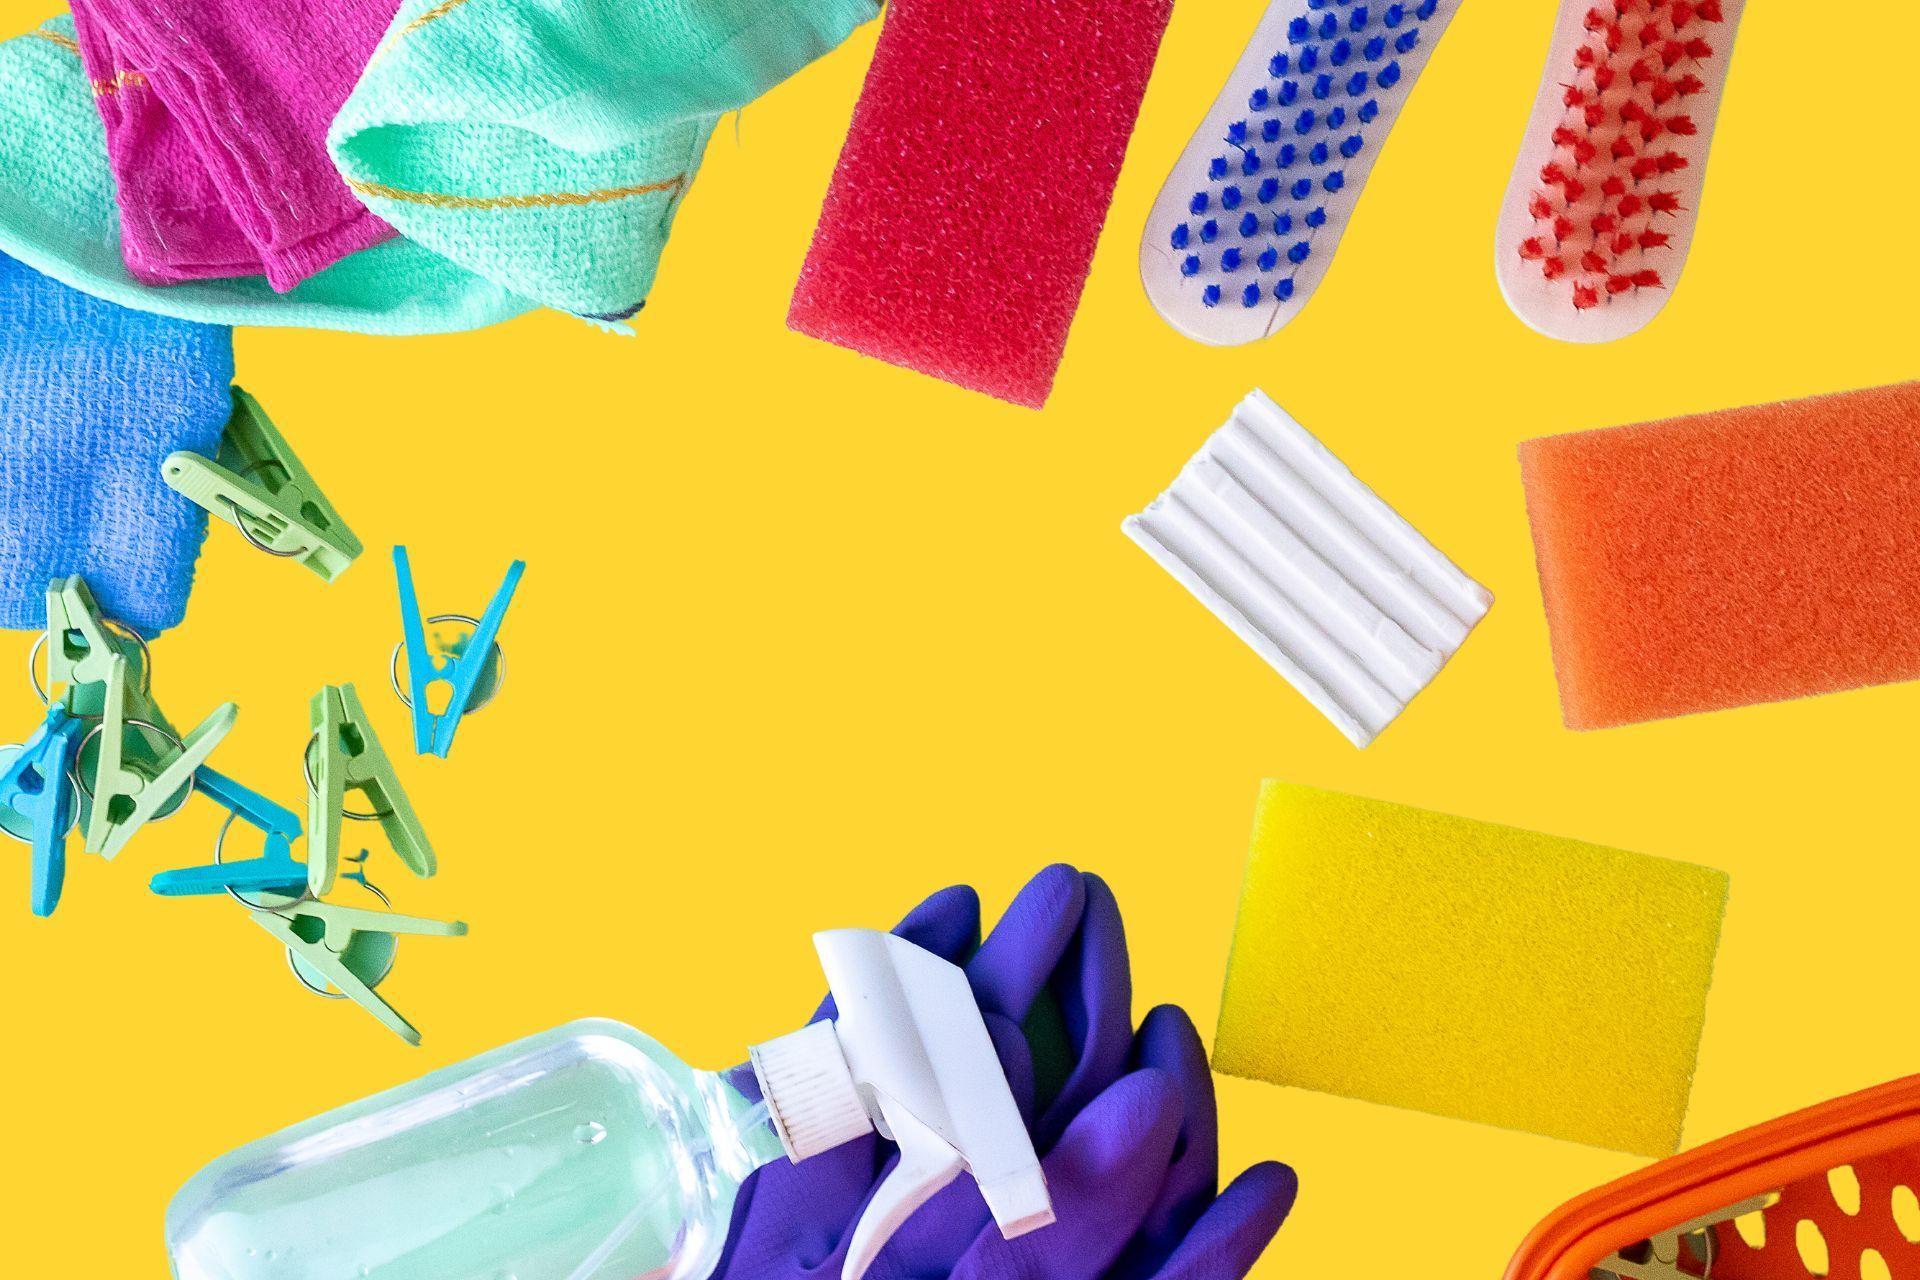 Image of cleaning essentials on a yellow background